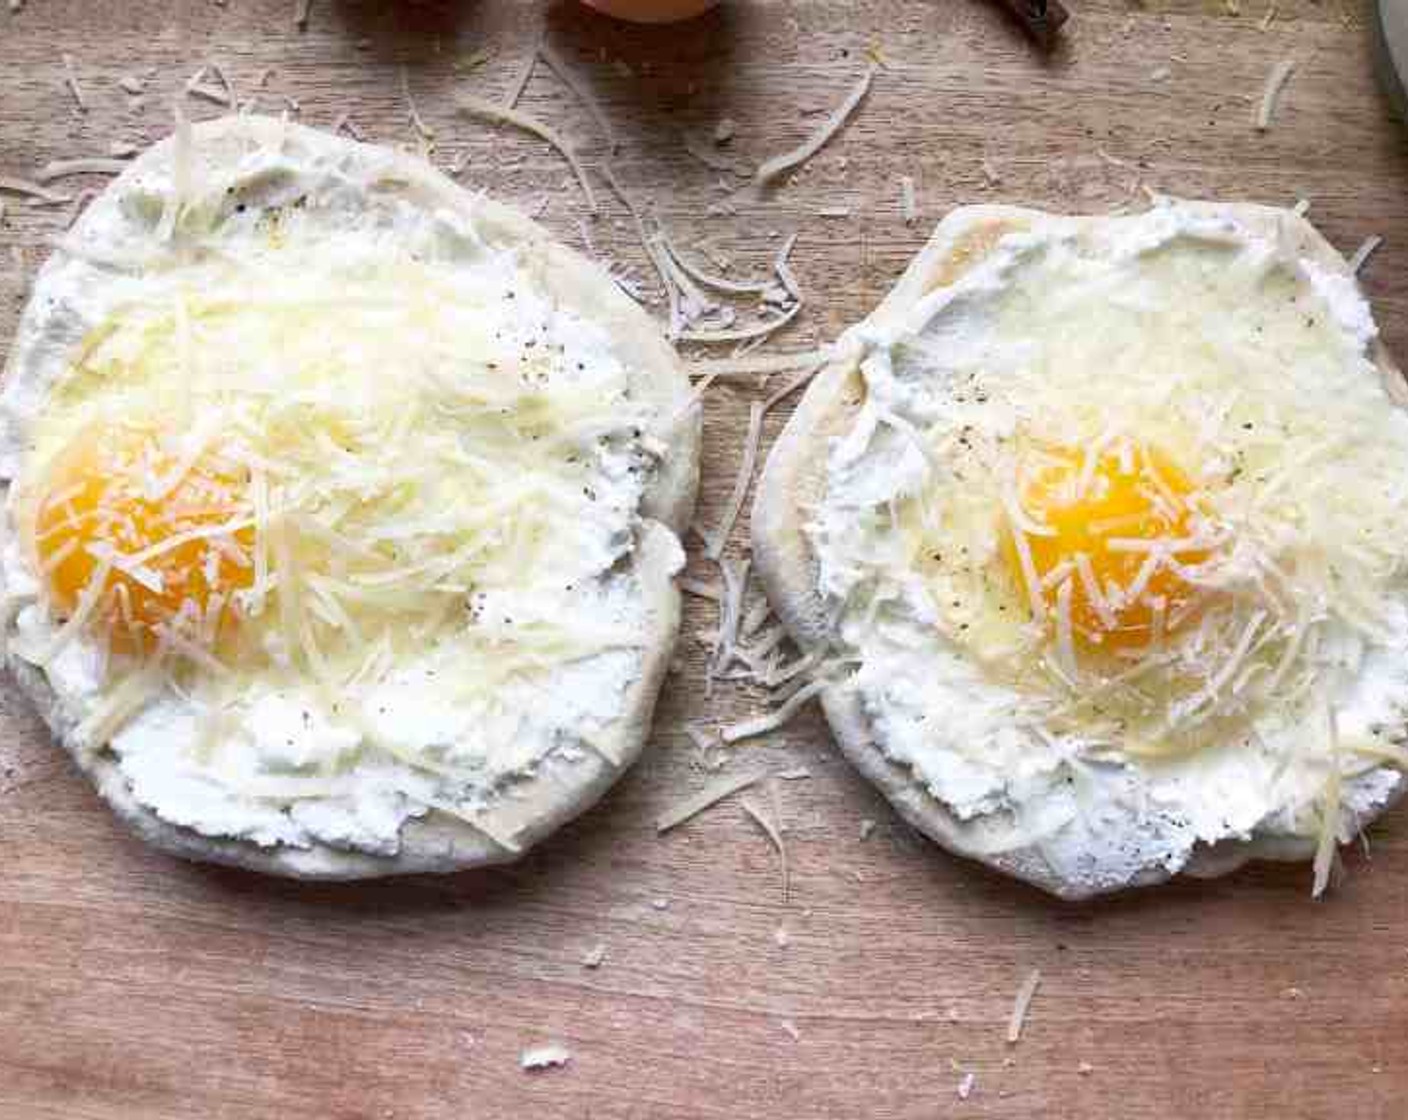 step 7 Sprinkle evenly with Kosher Salt (1/8 tsp), and Freshly Ground Black Pepper (1/8 tsp). Top each dough circle with 1 of the Farmhouse Eggs® Large Brown Eggs (4) and 1 Tbsp of Grated Parmesan Cheese (1/4 cup).